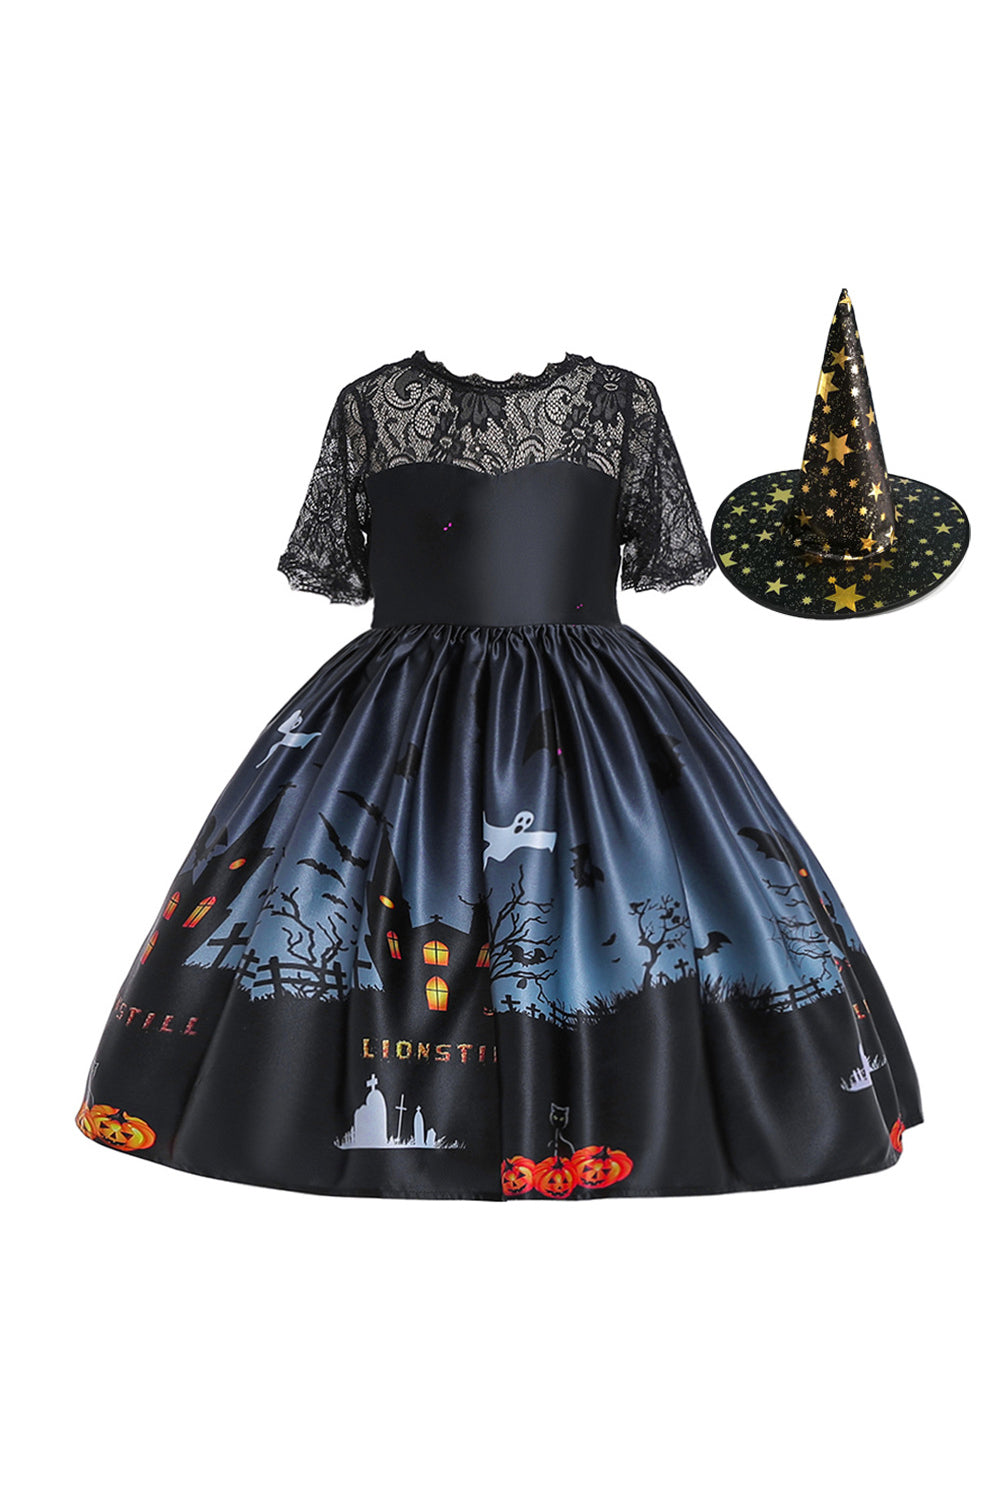 Black Short Sleeves Lace Printed Halloween Girl Dress With Bow